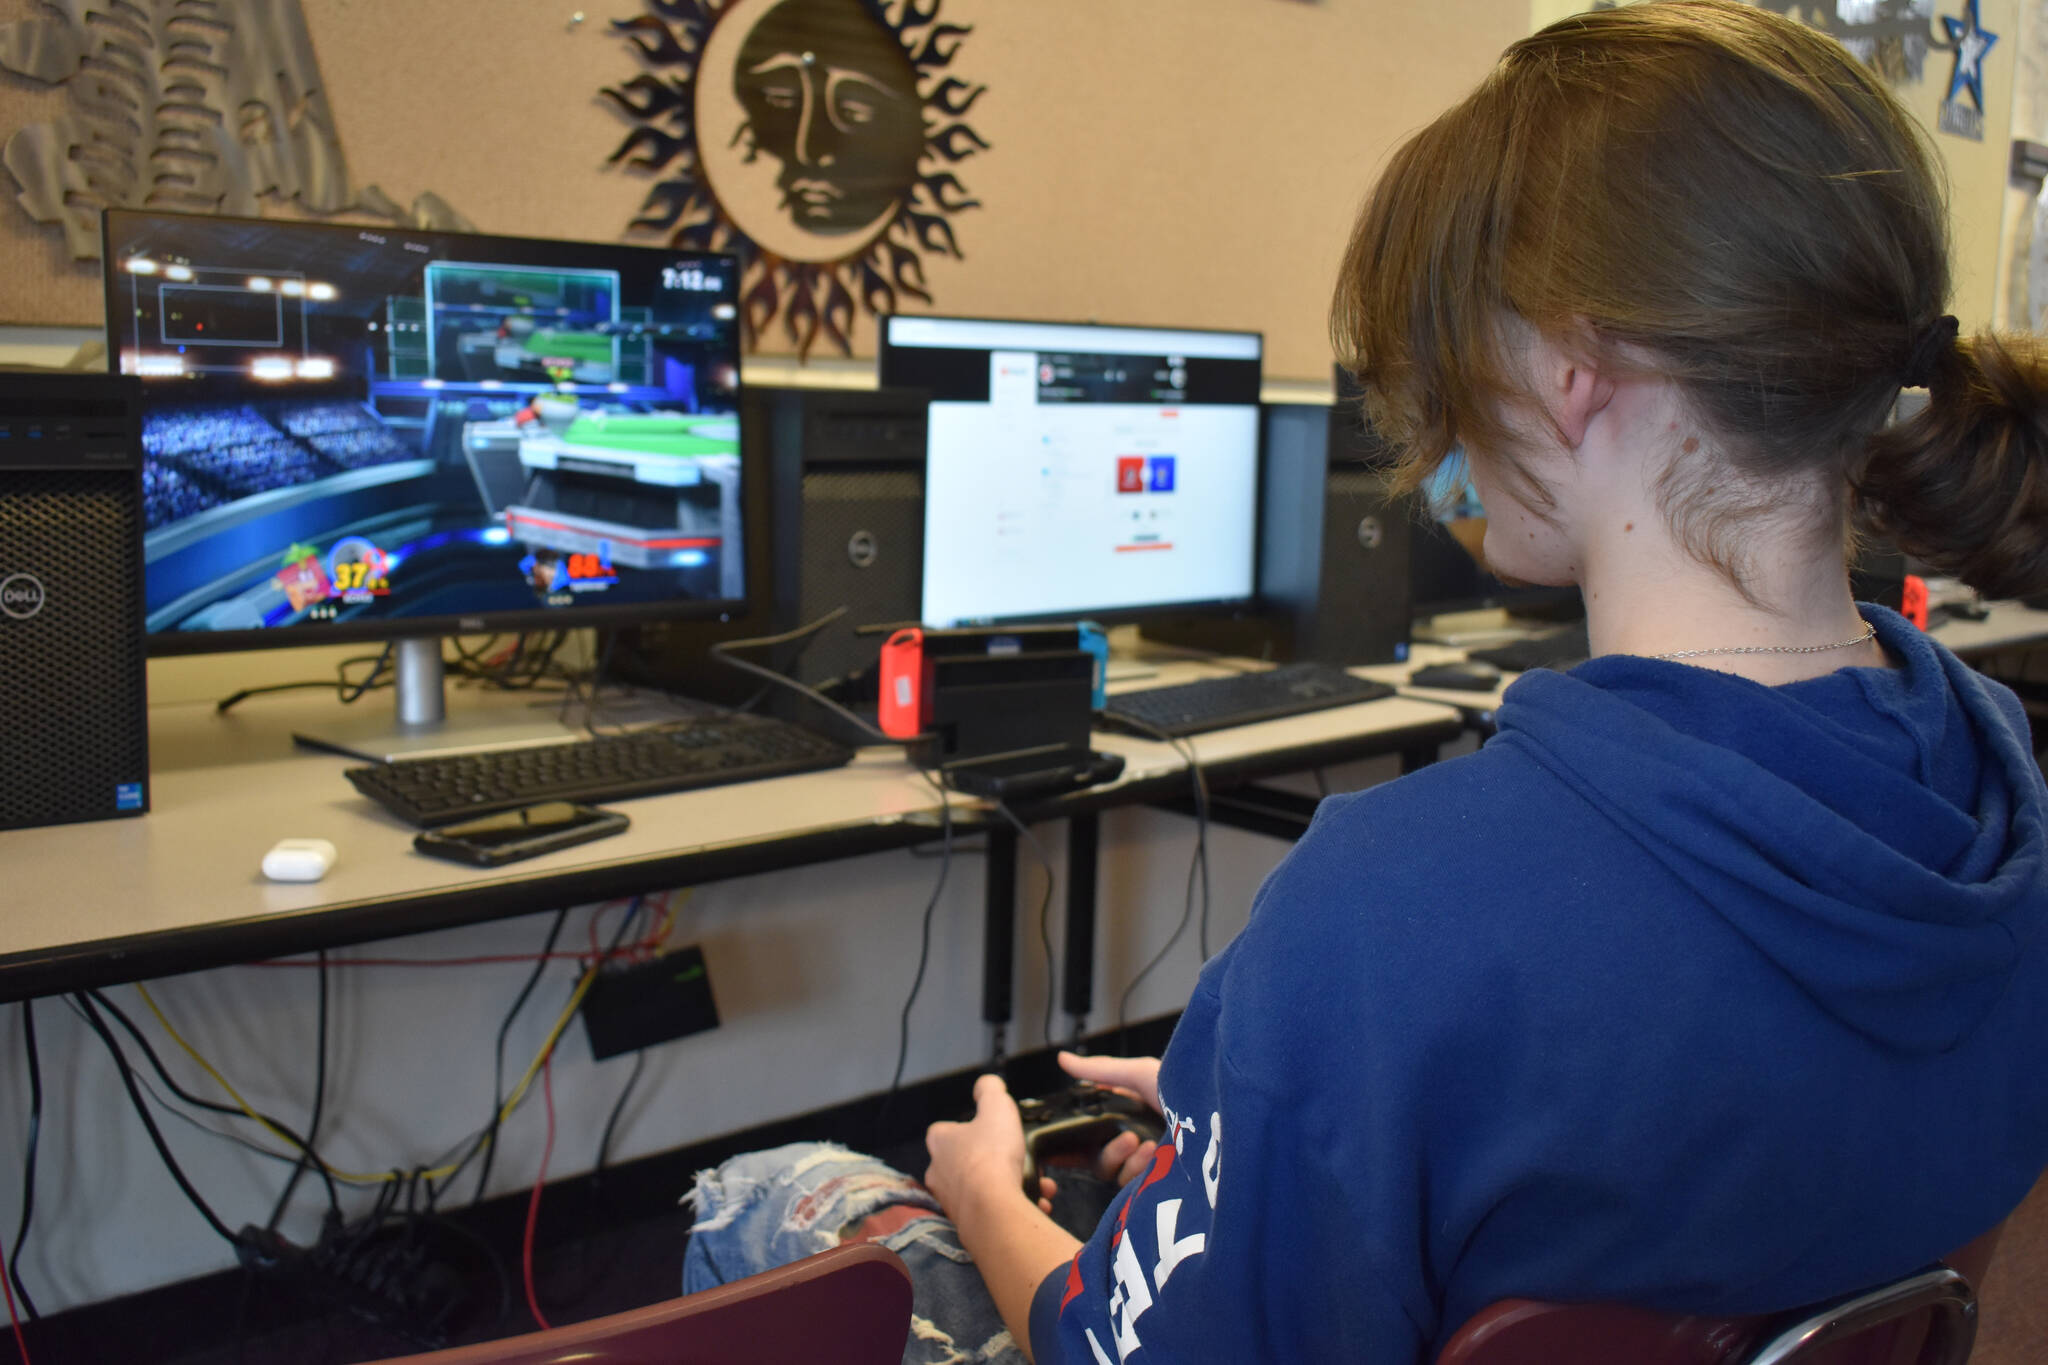 Kenai Central’s Koen Pace competes against Valdez High School in a playoff match for Alaska high school Super Smash Bros. Ultimate on Friday, April 14, 2023 at Kenai Central High School in Kenai, Alaska. (Jake Dye/Peninsula Clarion)